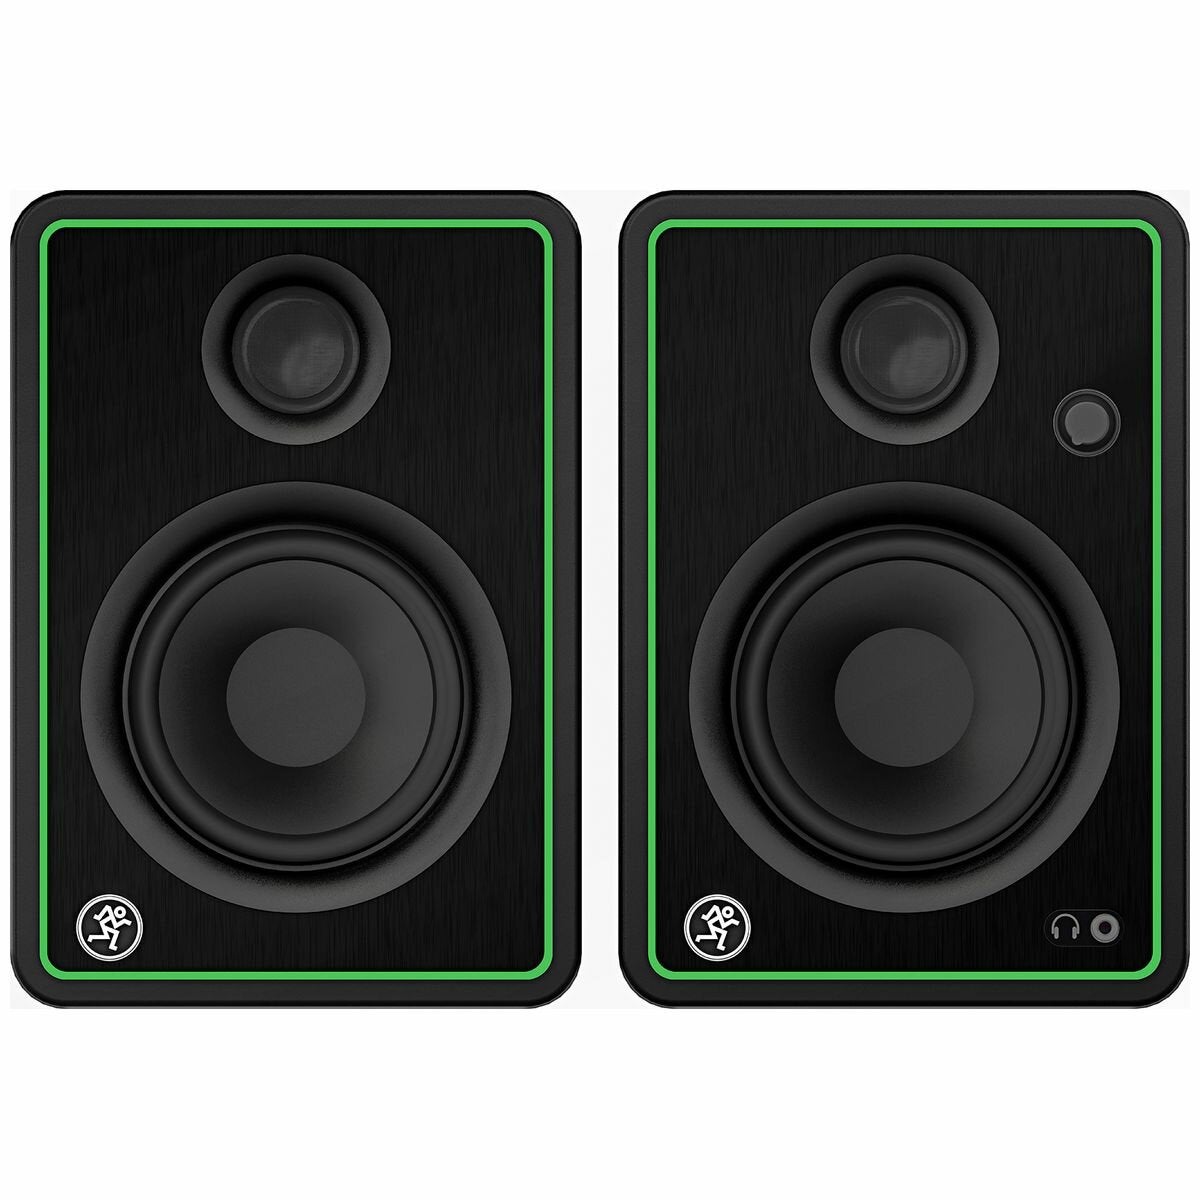 Image of Mackie 4 Inch Multimedia Studio Monitors with Bluetooth CR4-XBT